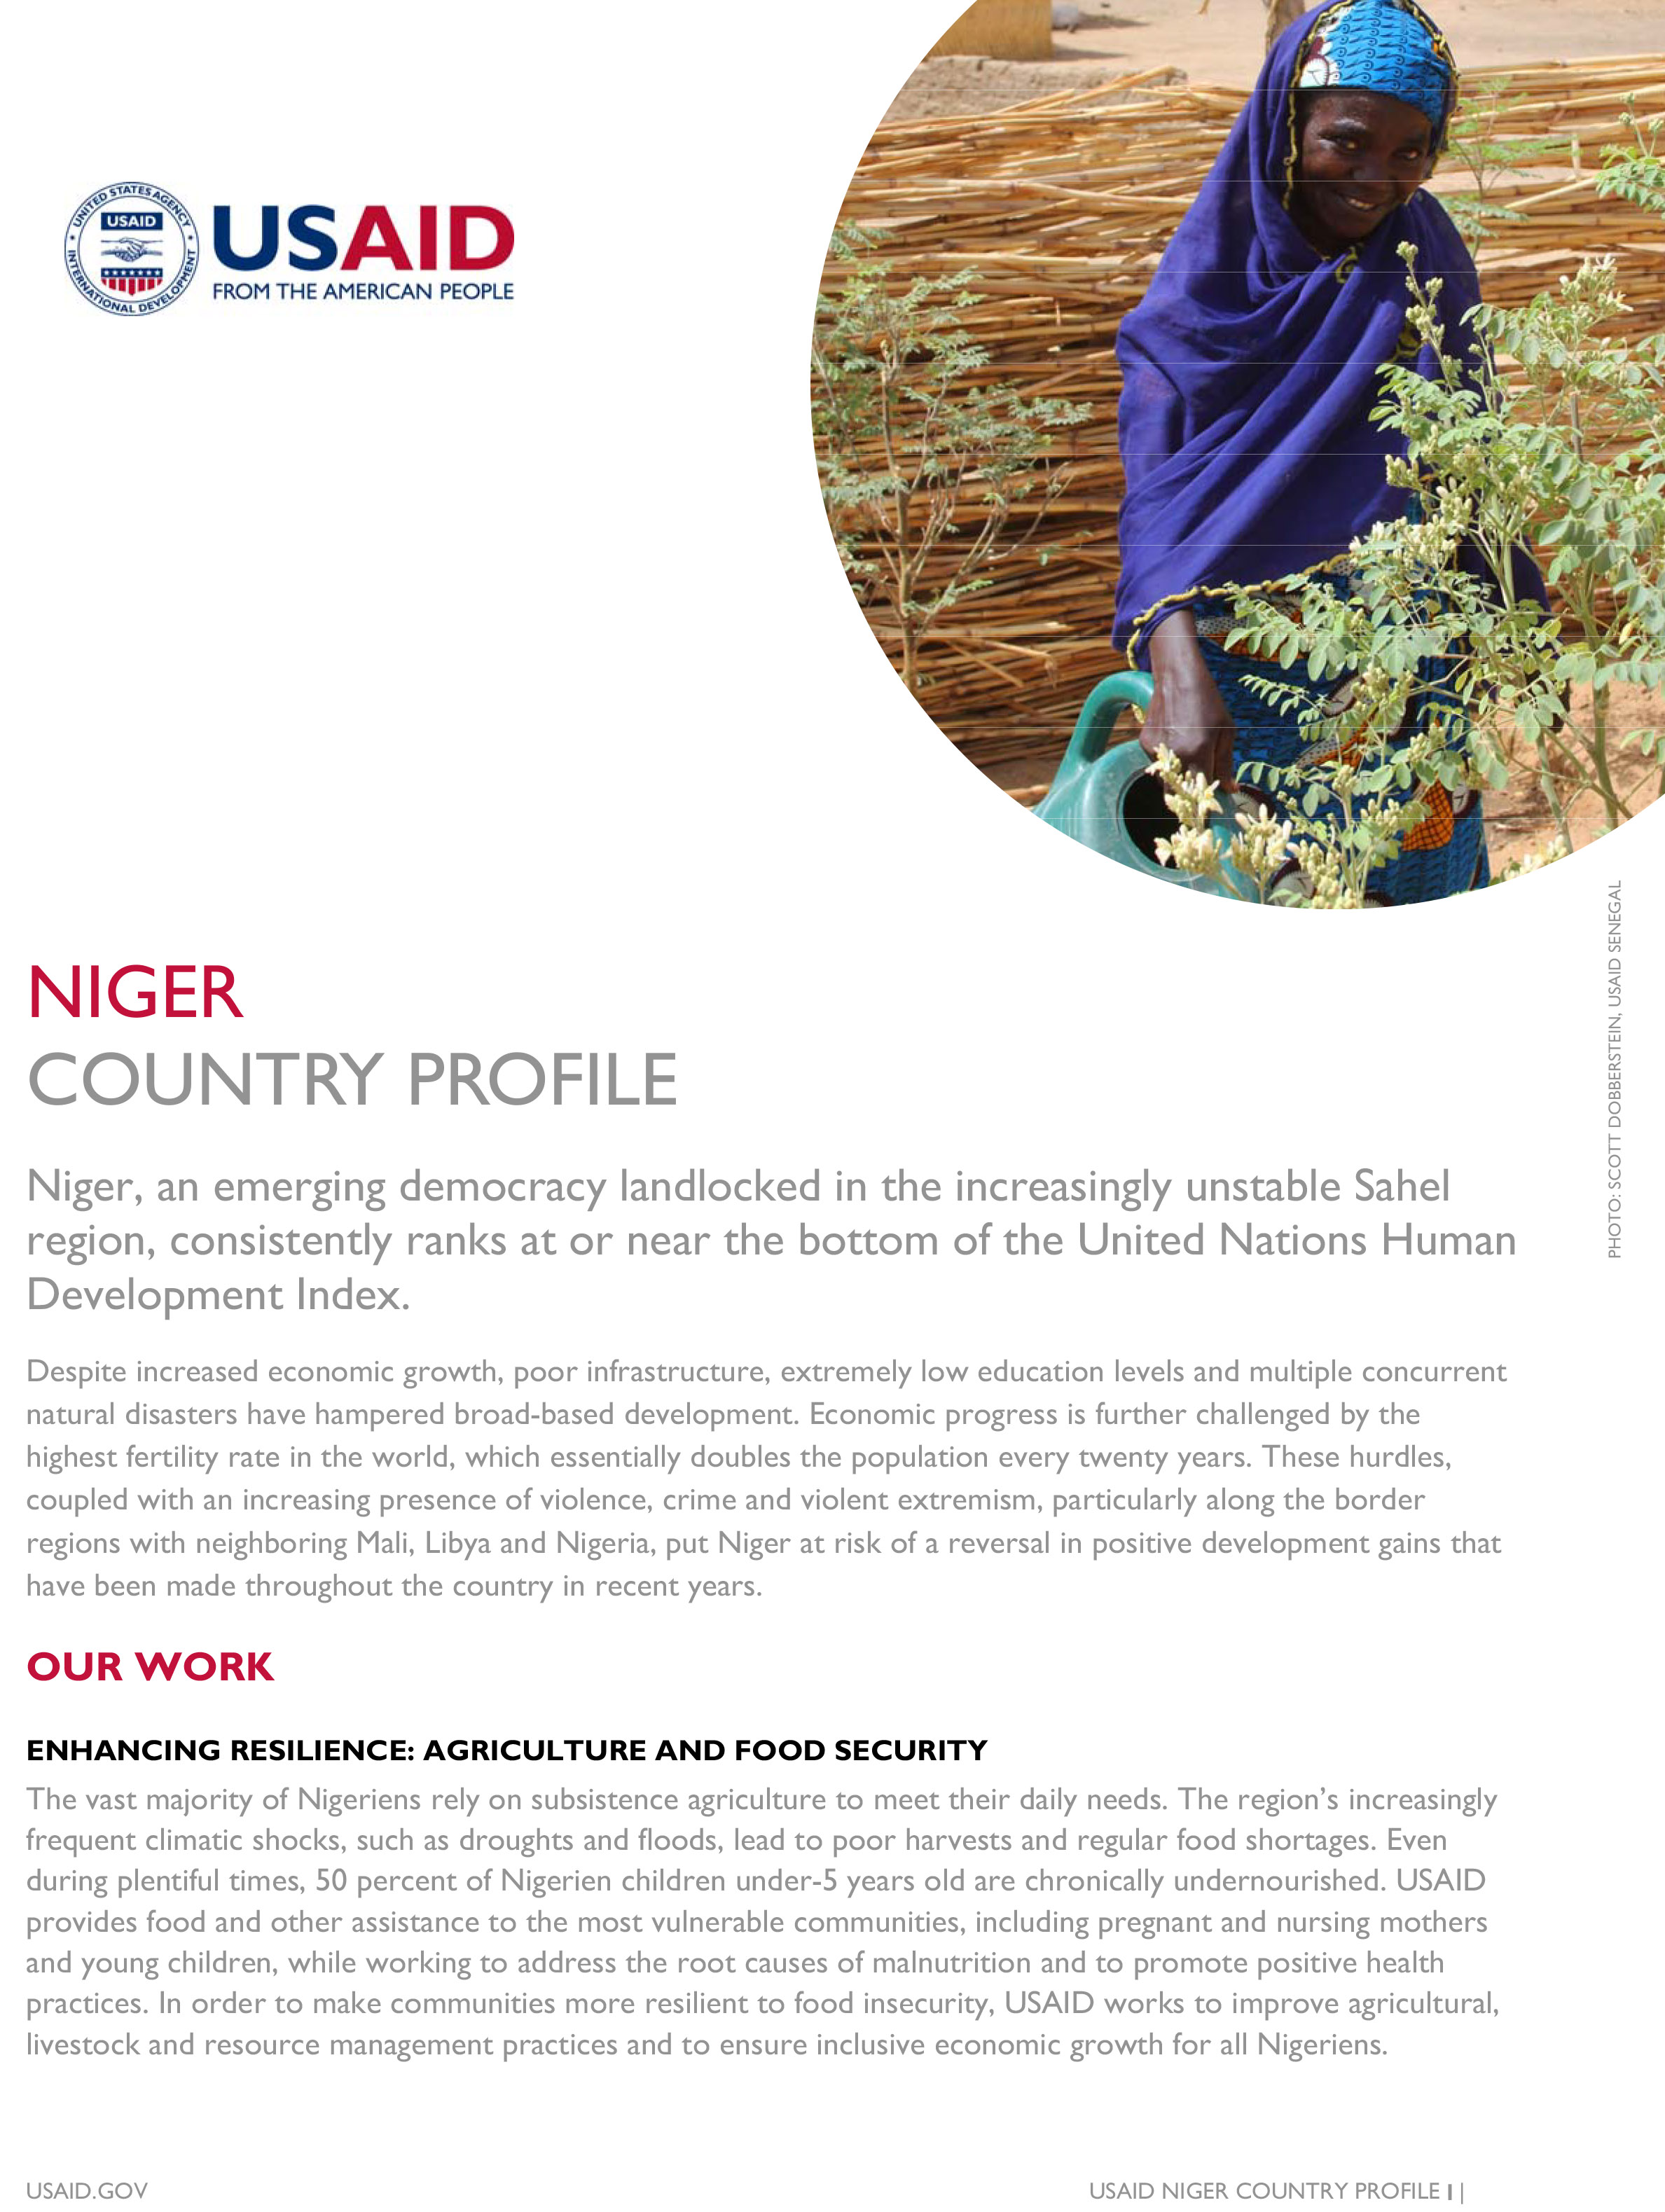 USAID Niger Country Profile